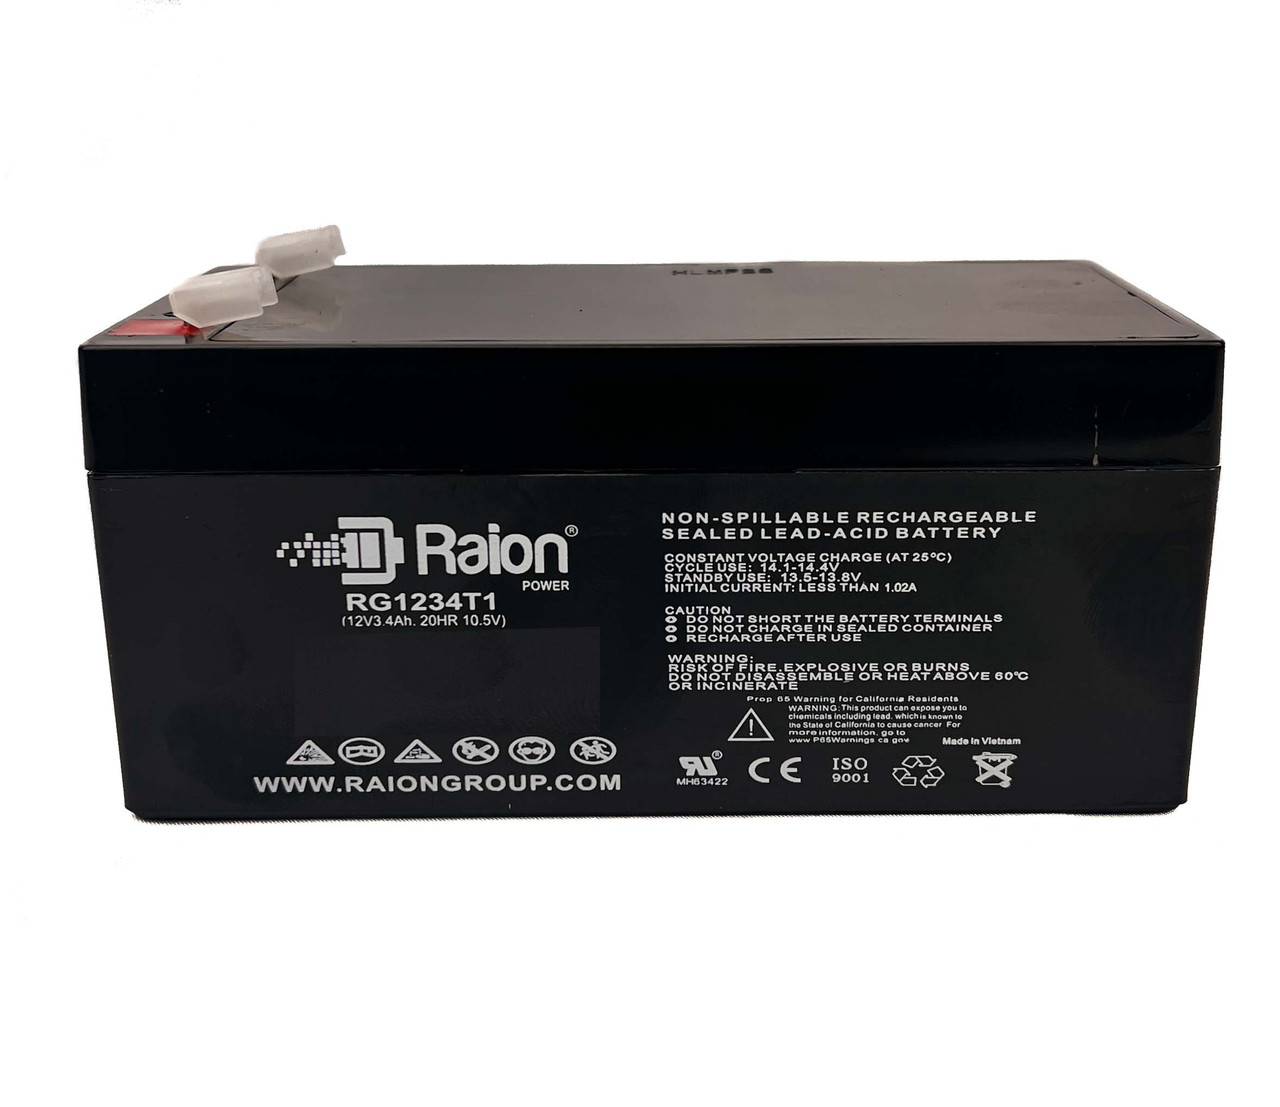 Raion Power RG1234T1 Rechargeable Compatible Replacement Battery for Motoma MS12V2.8